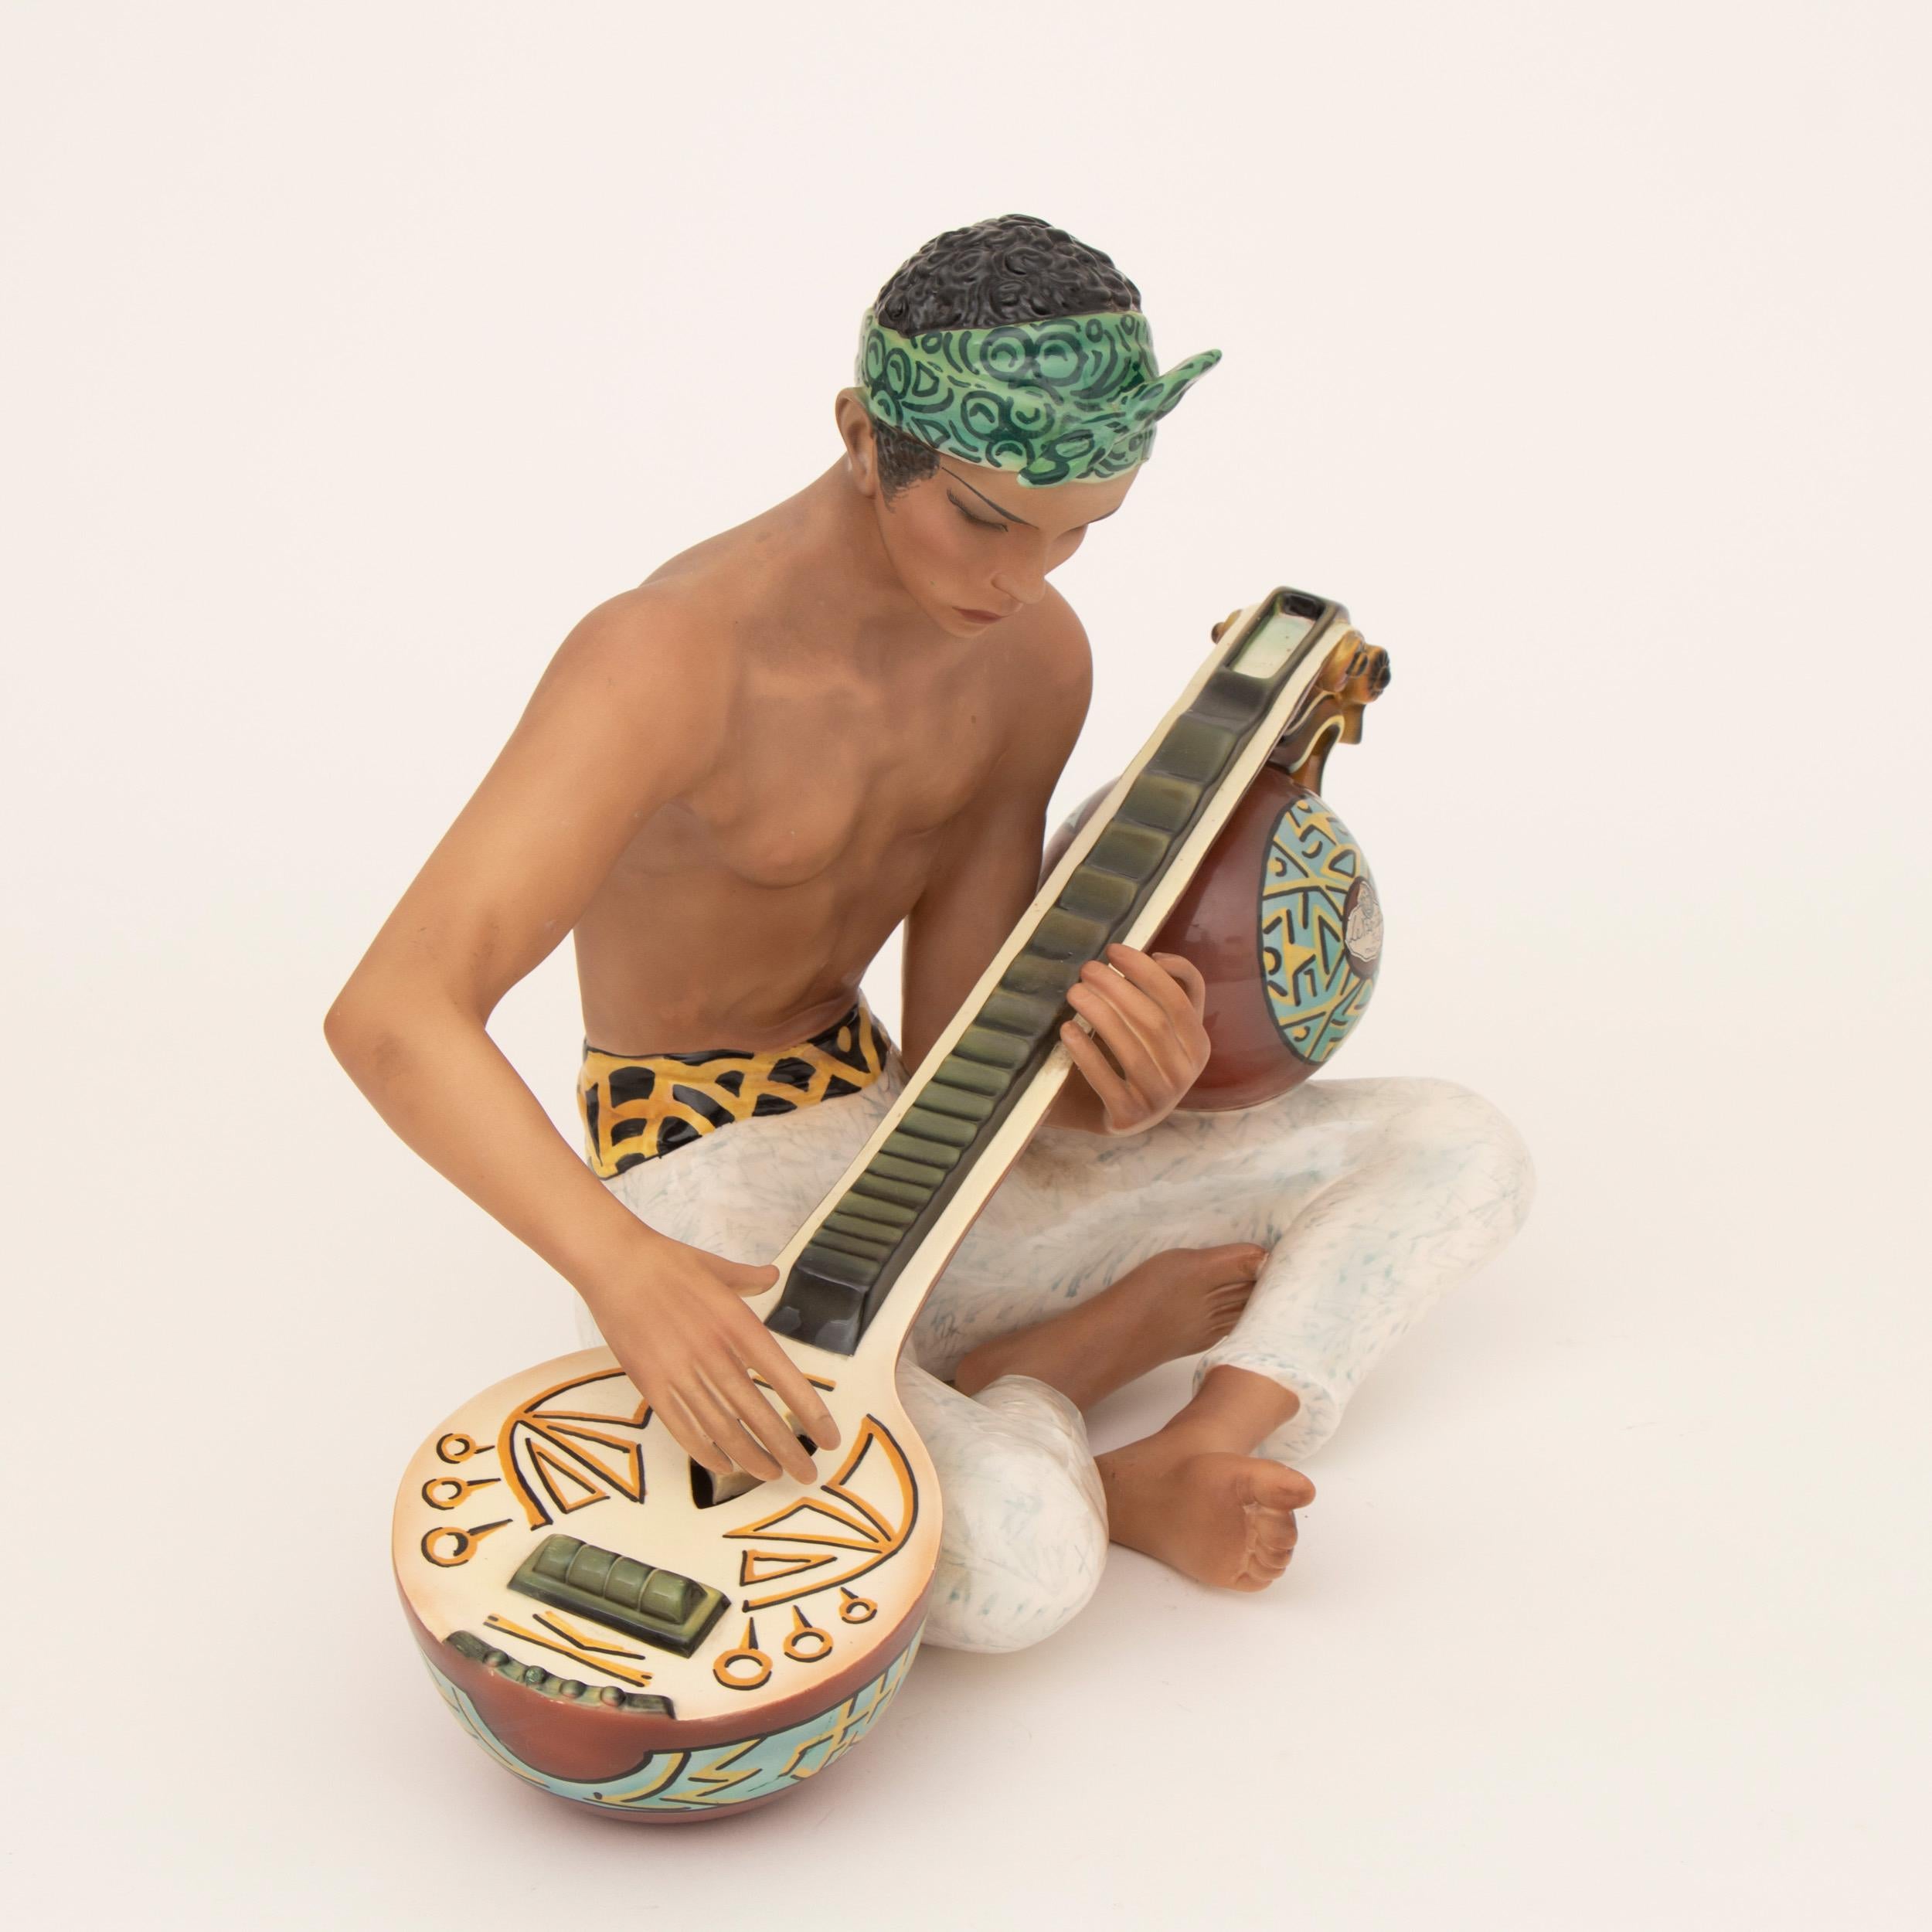 An exquisite figure with contrasting matte and gloss glazes of an Indonesian boy playing a sitar and dressed in white pants with a printed belt, wearing a patterned kerchief.
Measures: H 39cm W 48cm D 30cm
Italy circa 1933

Clelia Bertetti